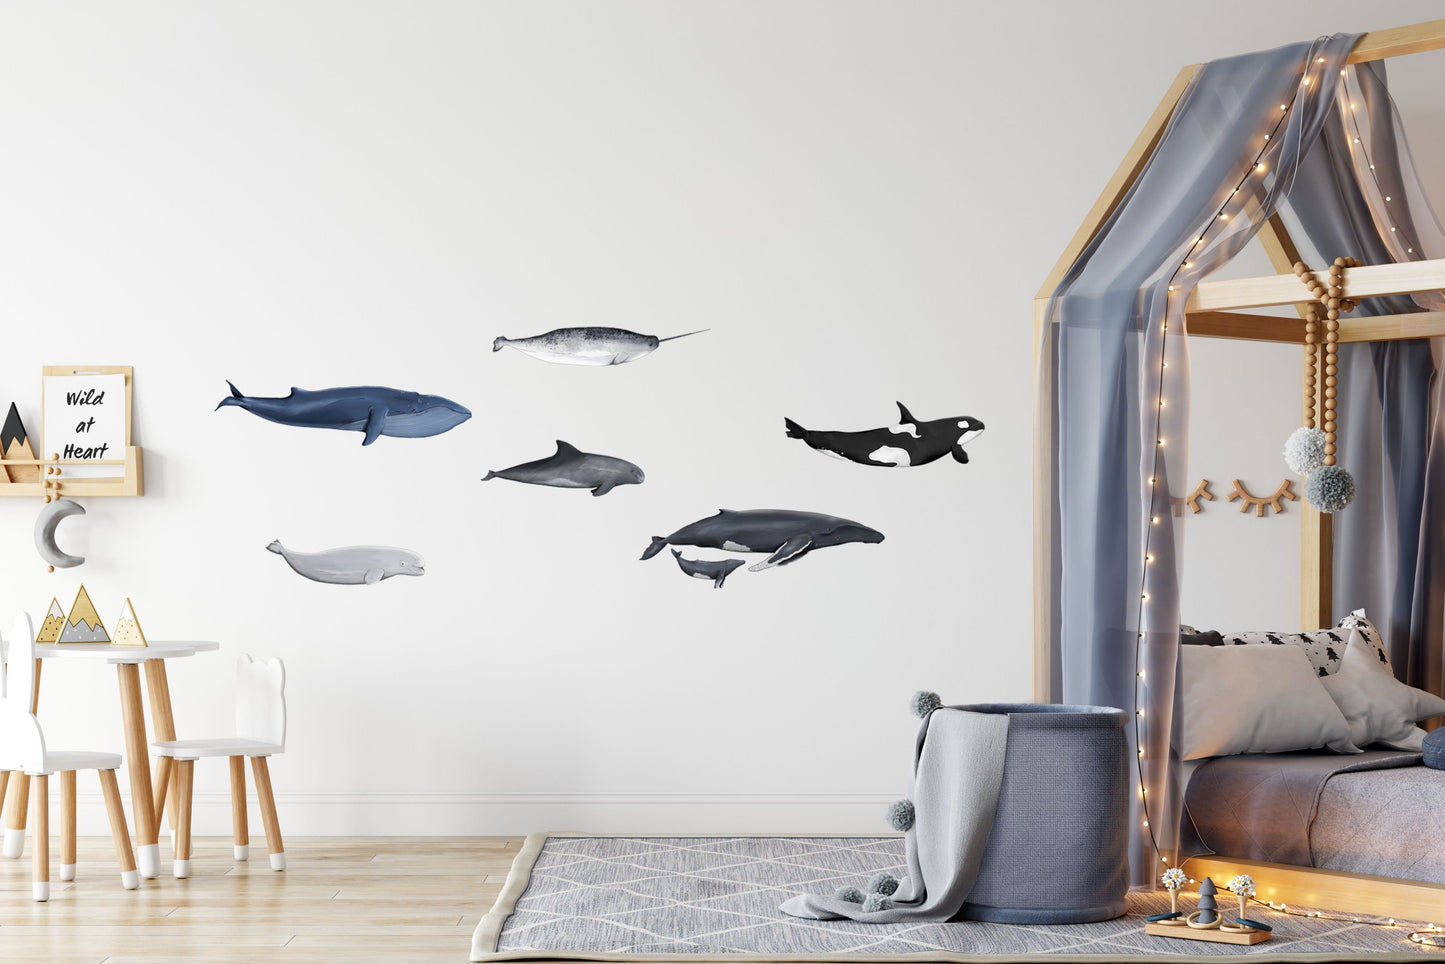 Ocean Themed Wall Decals (Whales) - Wall Decals - Fable and Fawn 